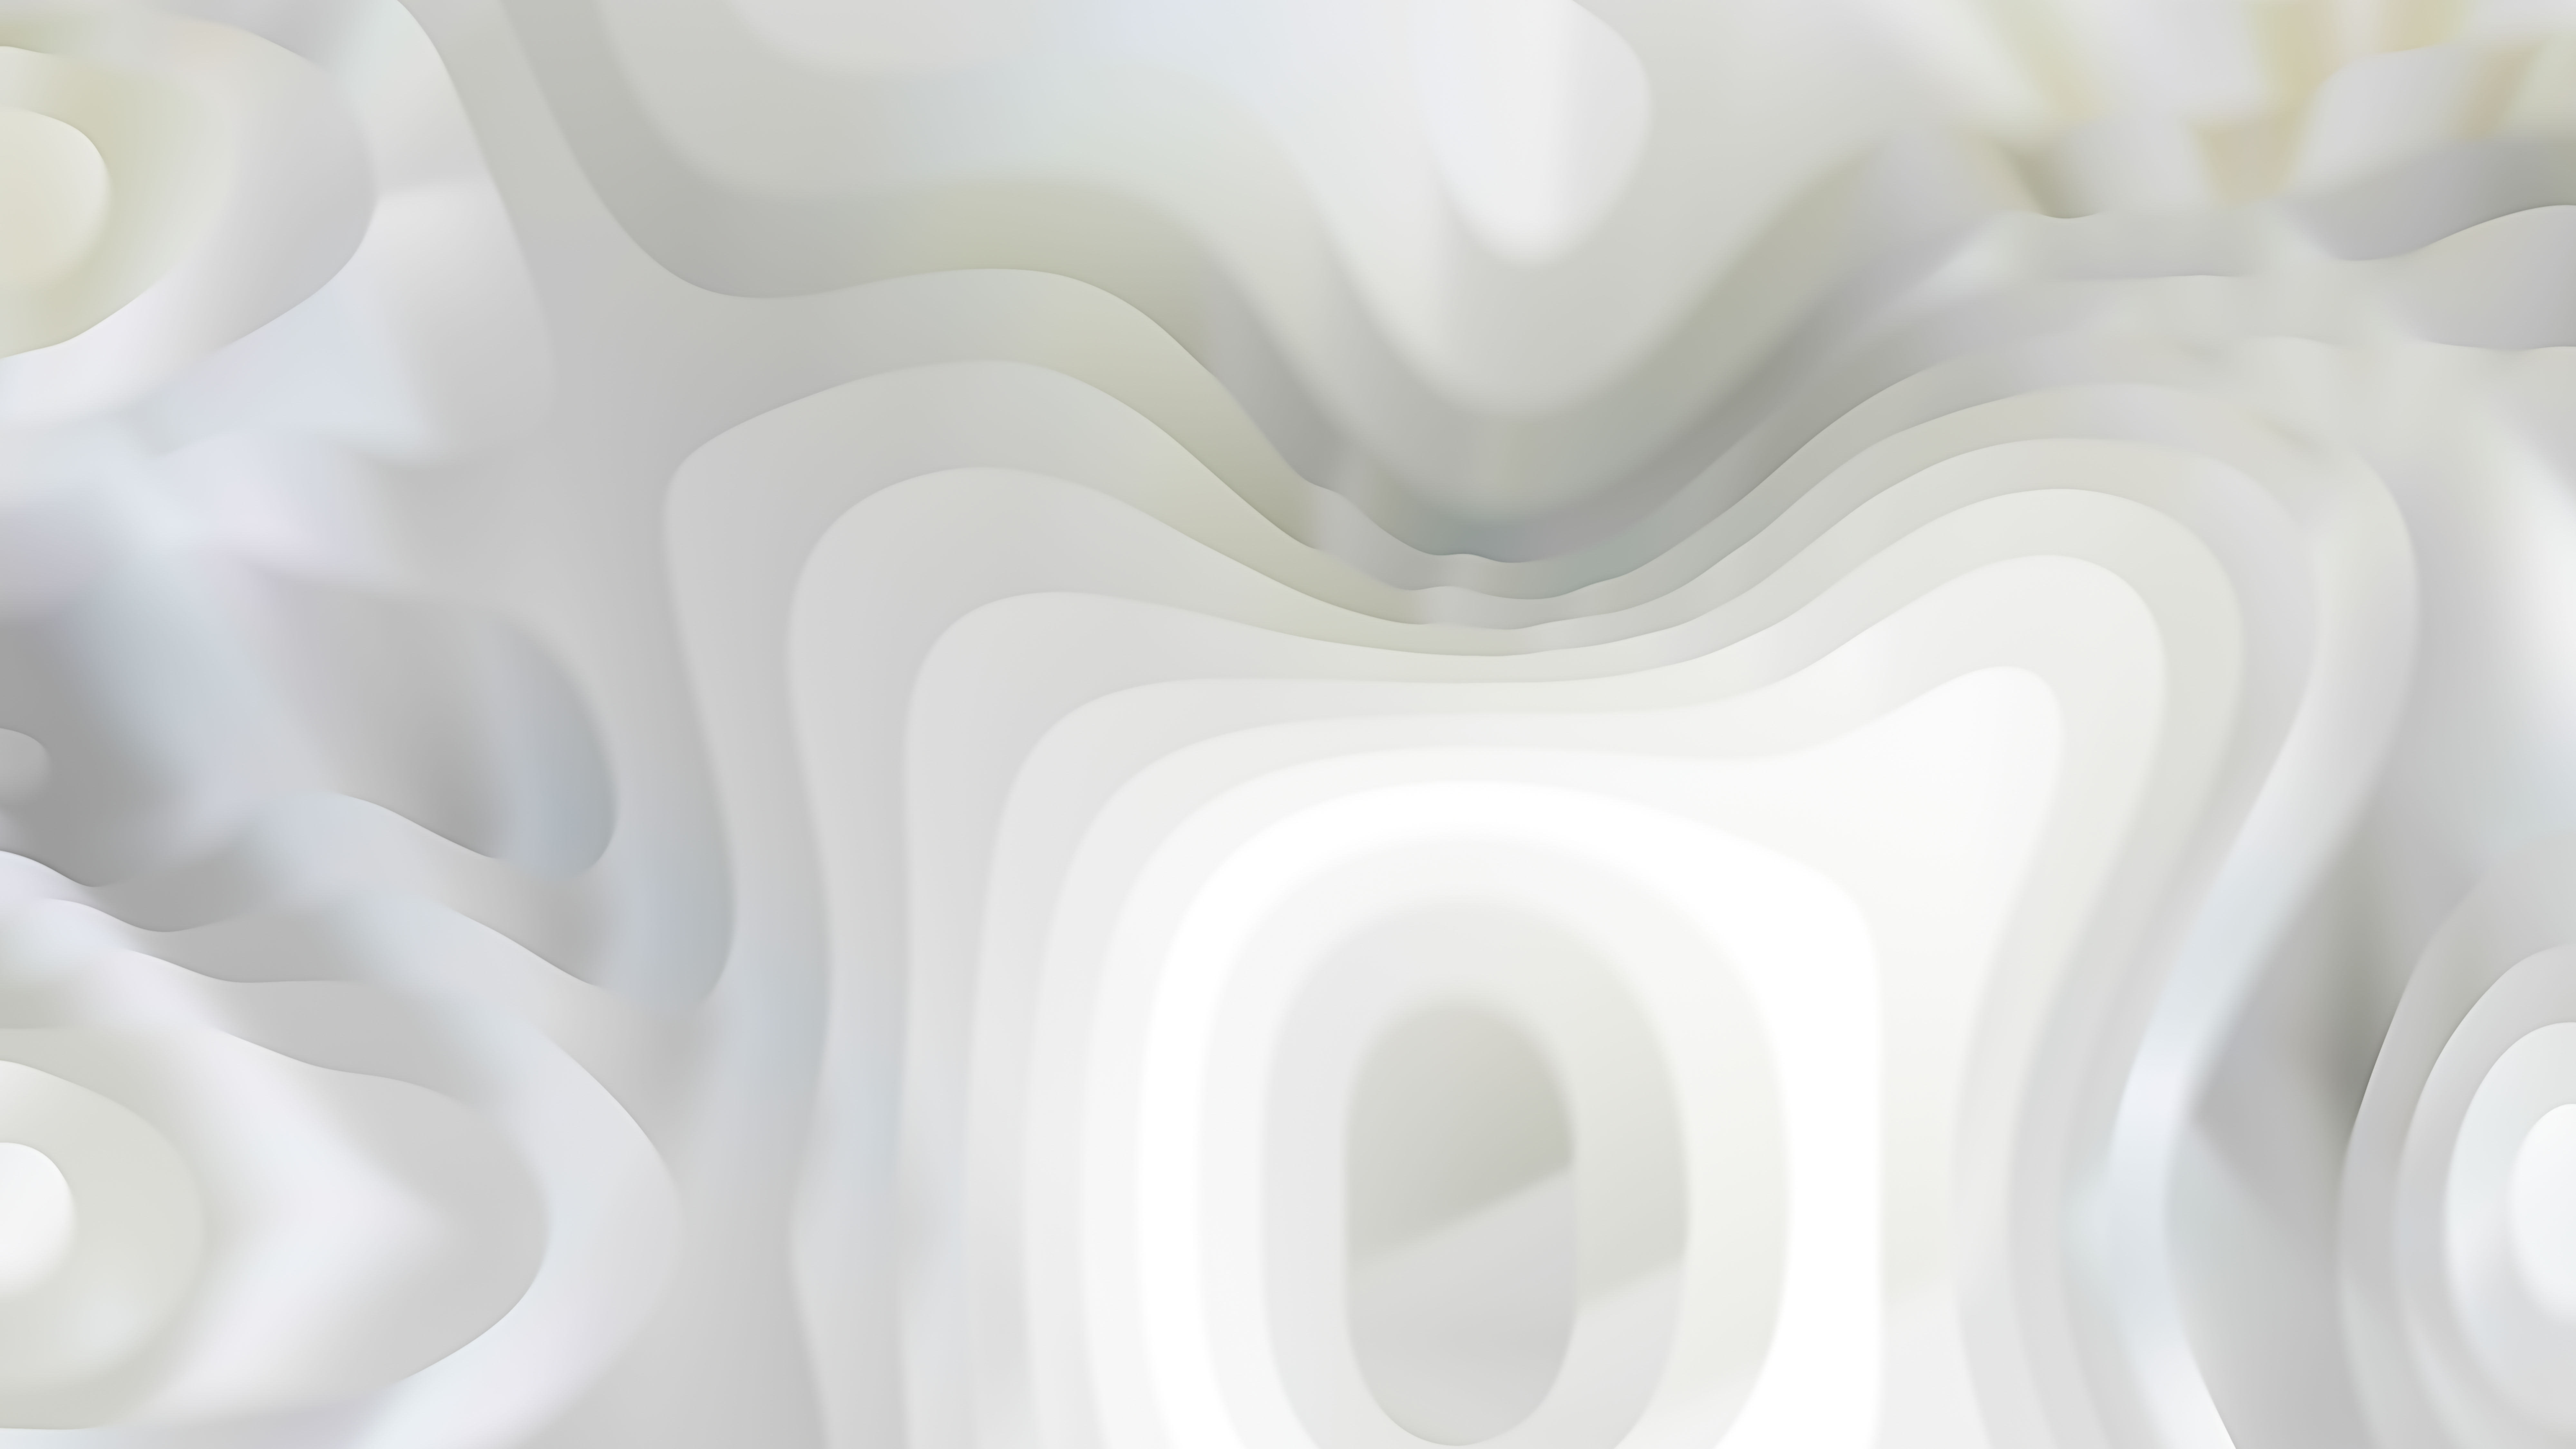 White Abstract Texture Background Design - Pretty White Abstract Backgrounds  - 8000x4500 Wallpaper 